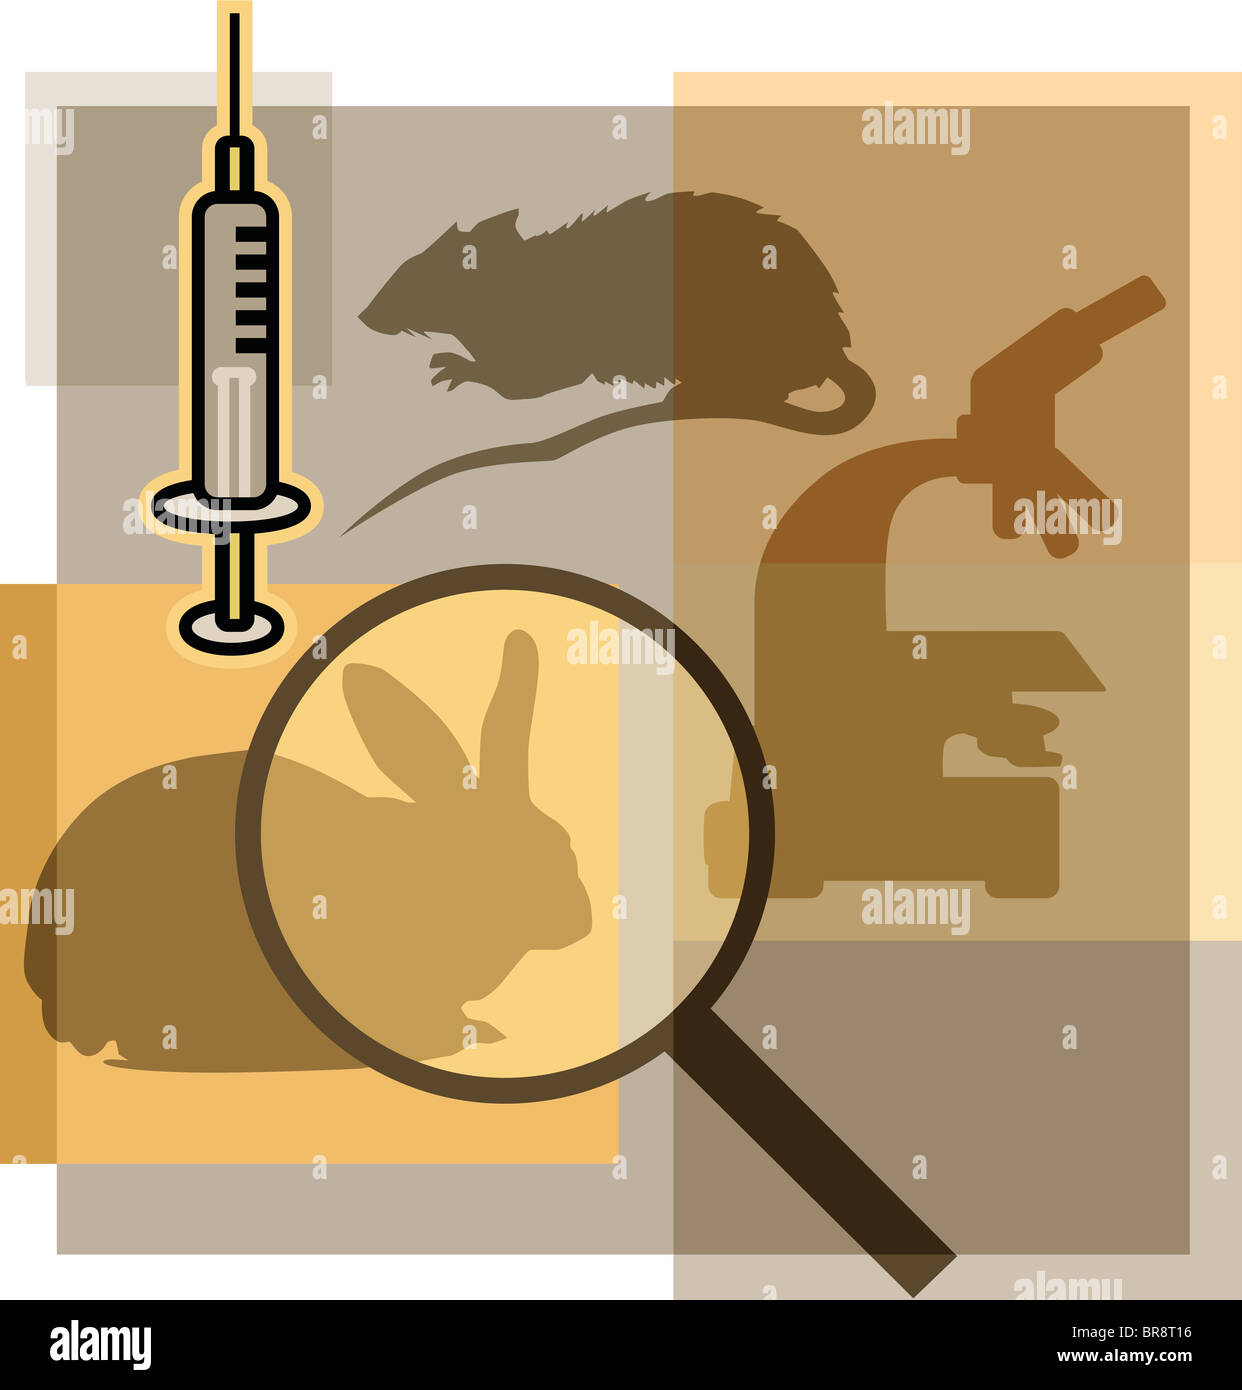 Montage illustration about animal testing containing a rat, rabbit, microscope, magnifying glass, and syringe Stock Photo